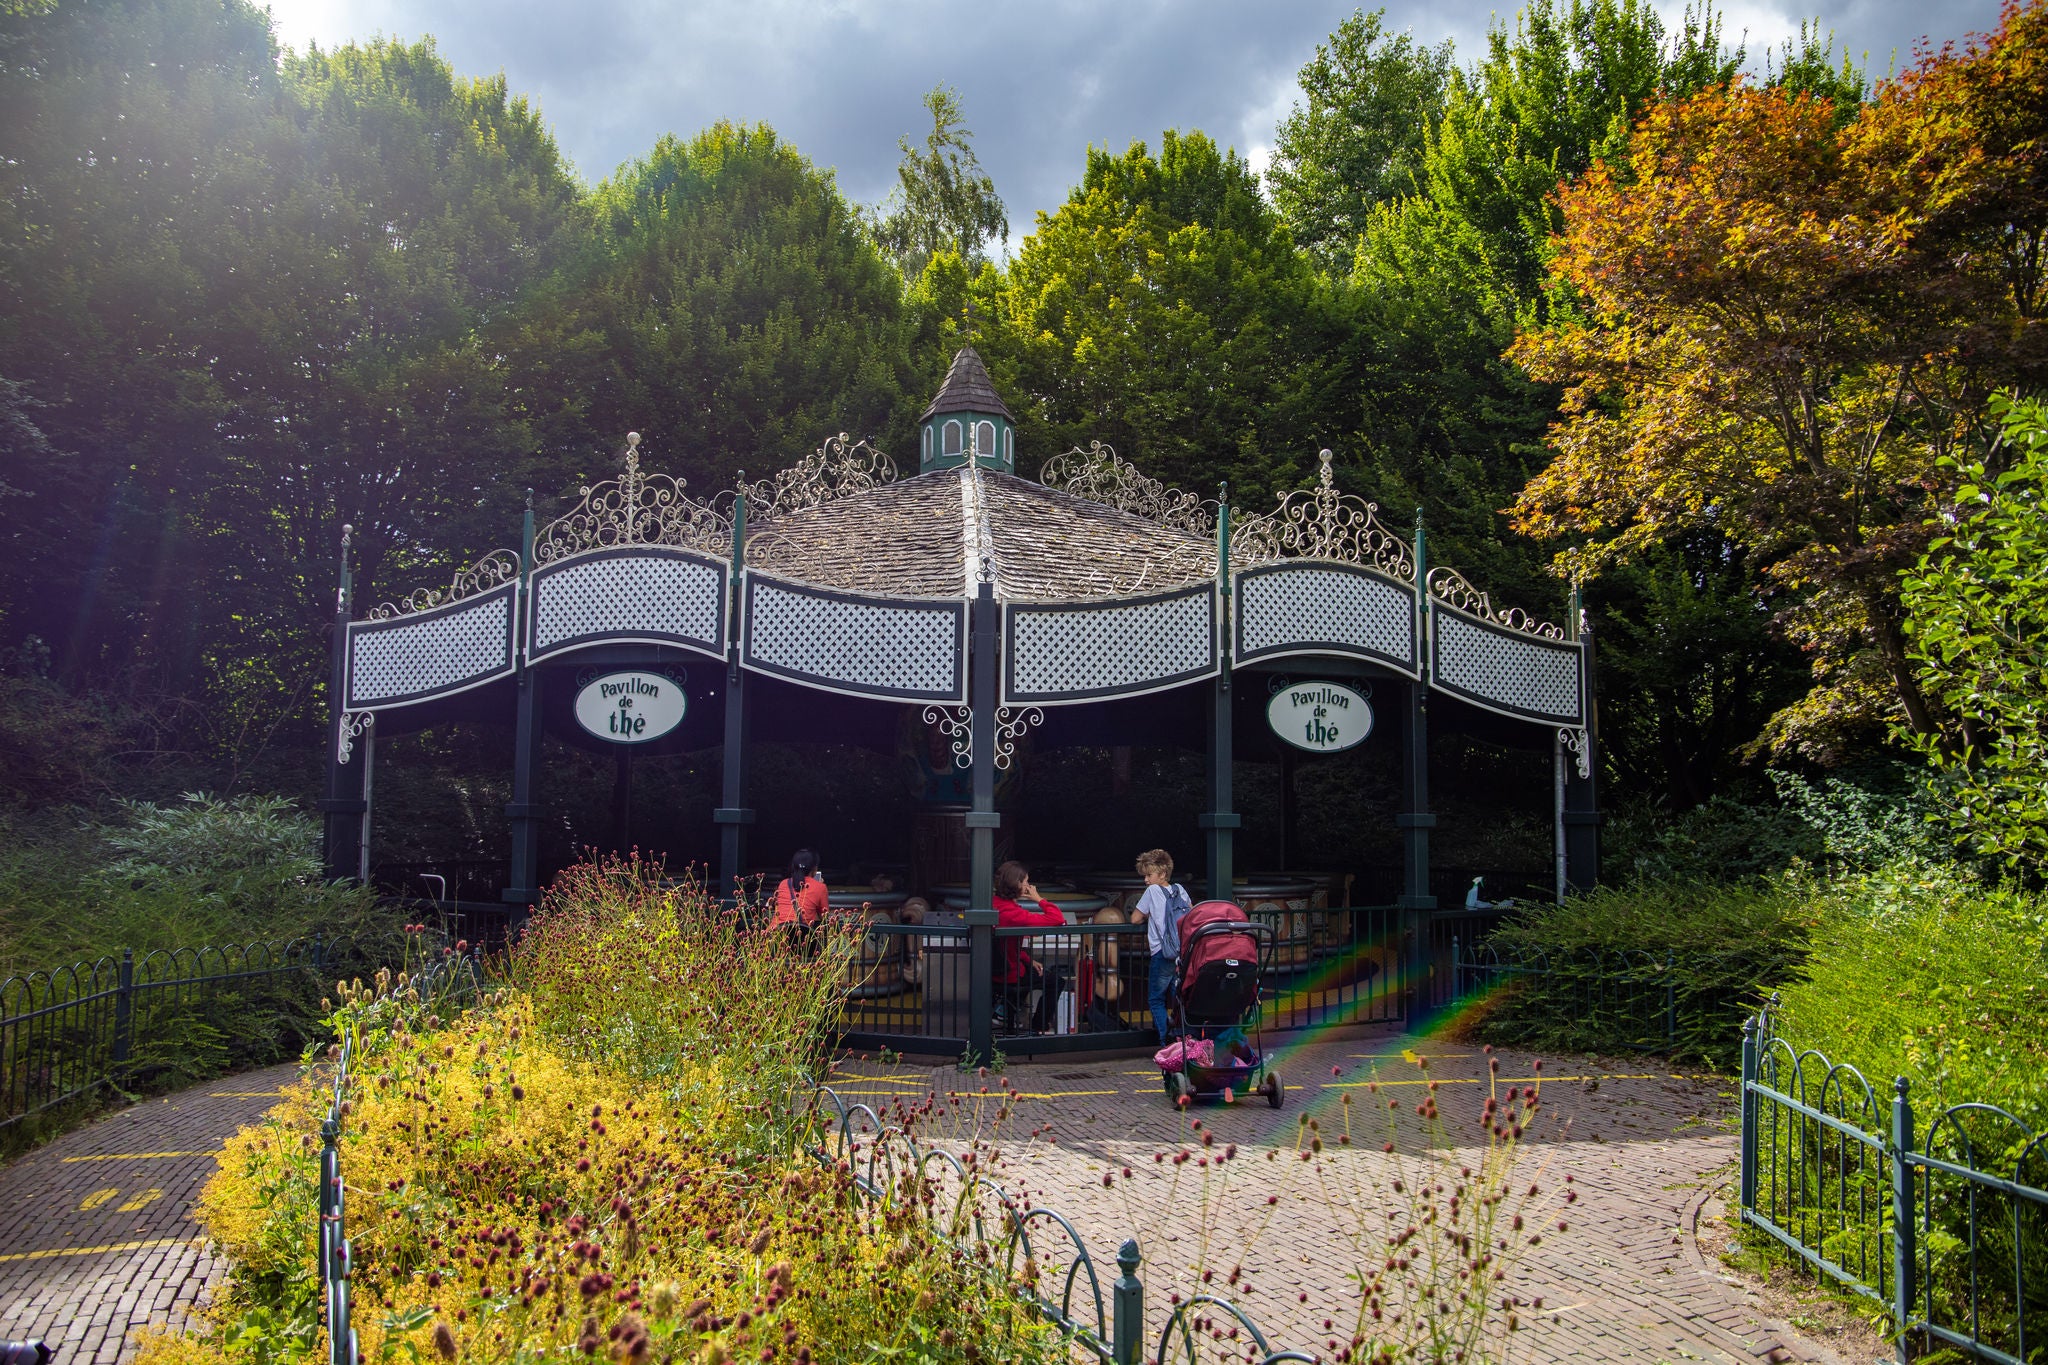 The teacup attraction at Walibi Holland.